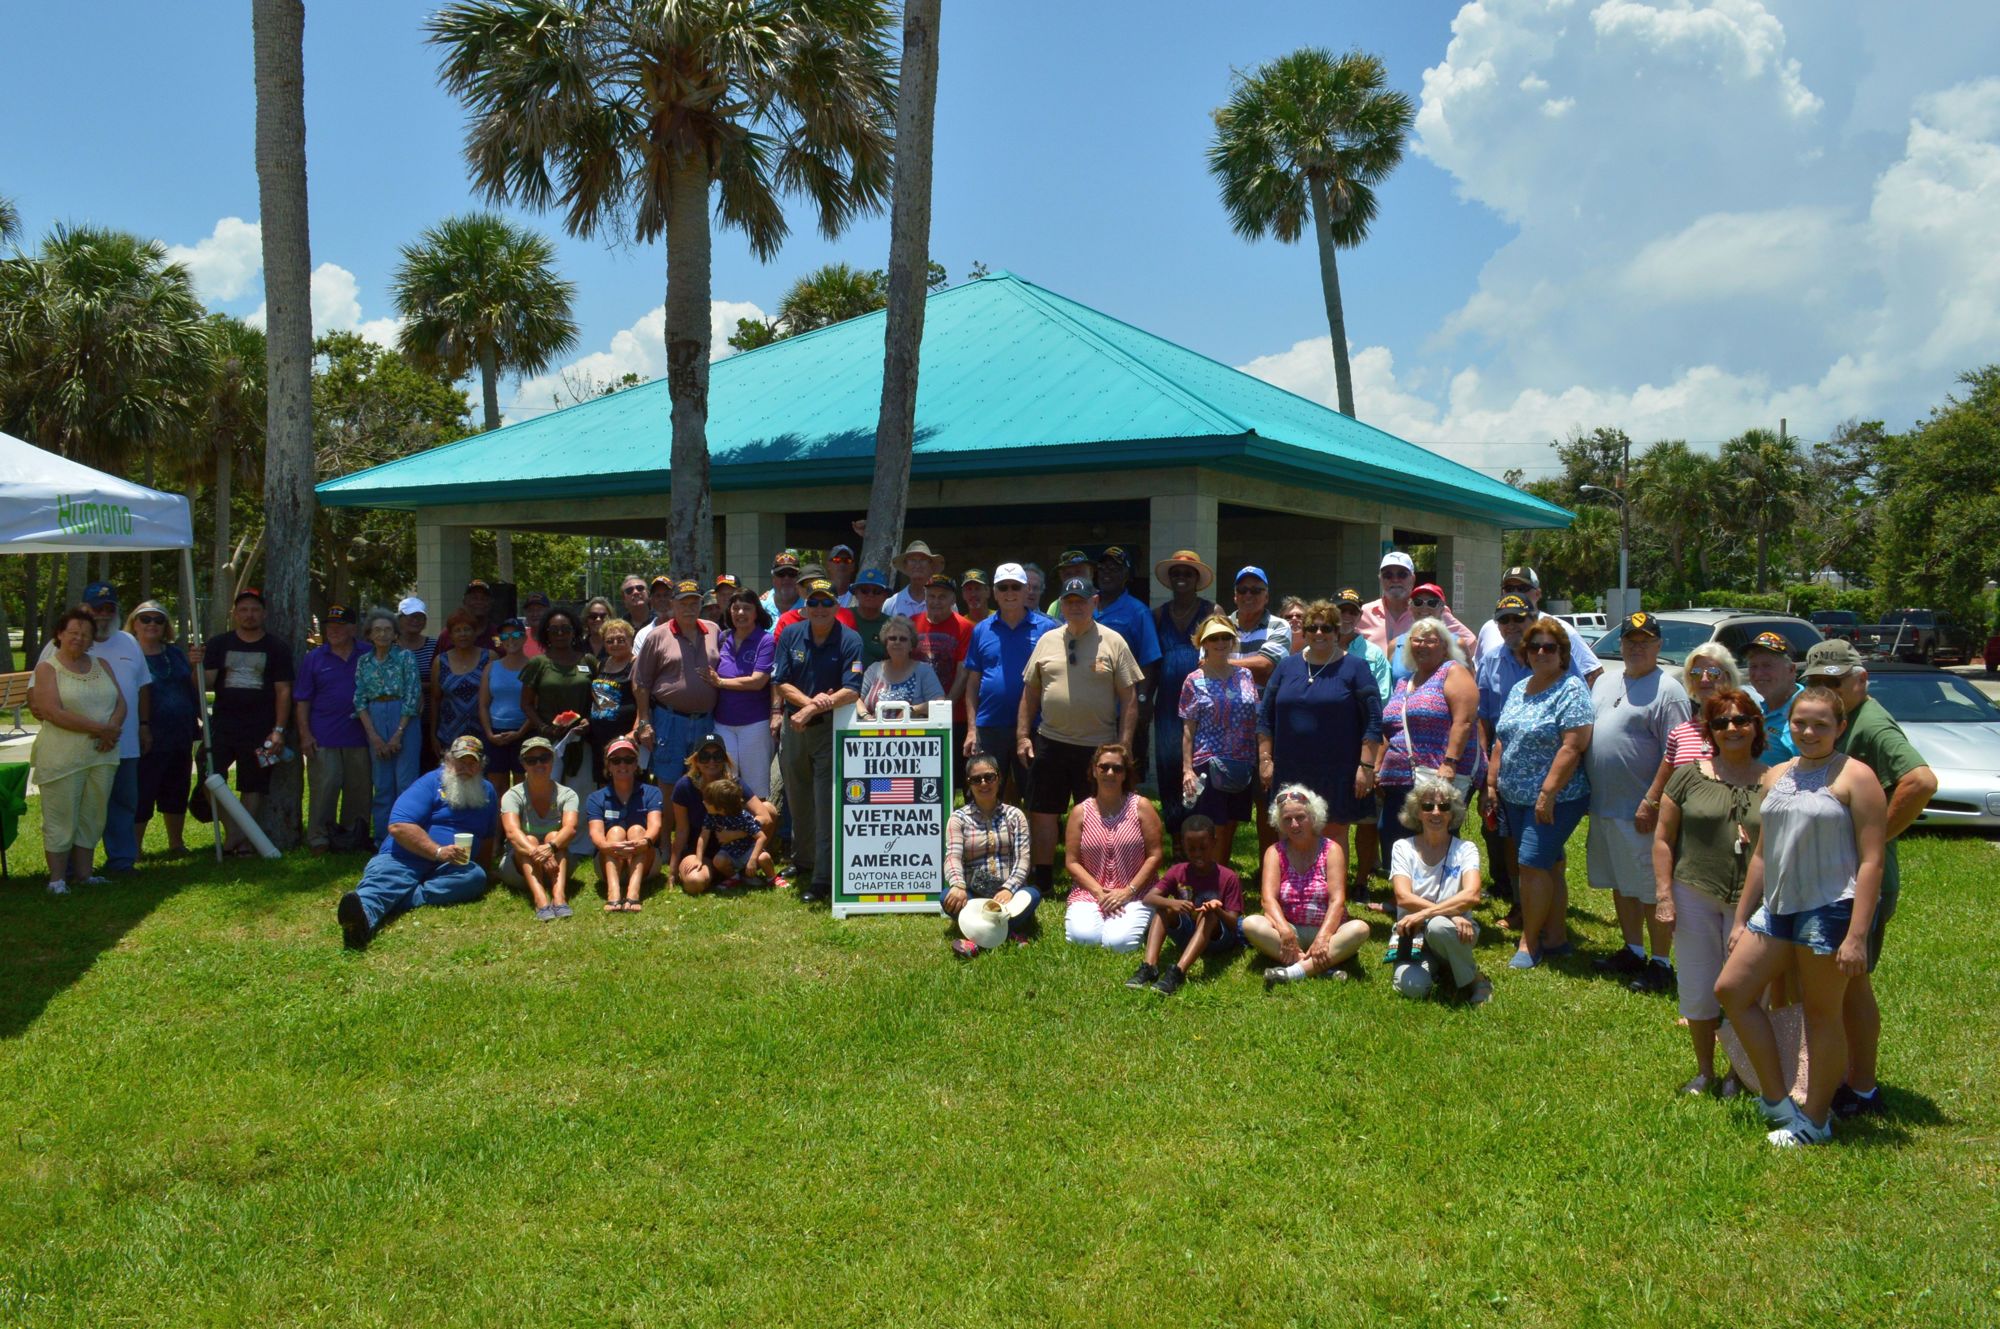 Annual Picnic with Military Order of the Purple Heart Volusia County 316 and Vietnam Veterans of America Daytona Beach Chapter 1048 at Riverfront Veterans Memorial Park in South Daytona Beach. Photo courtesy of Ken English